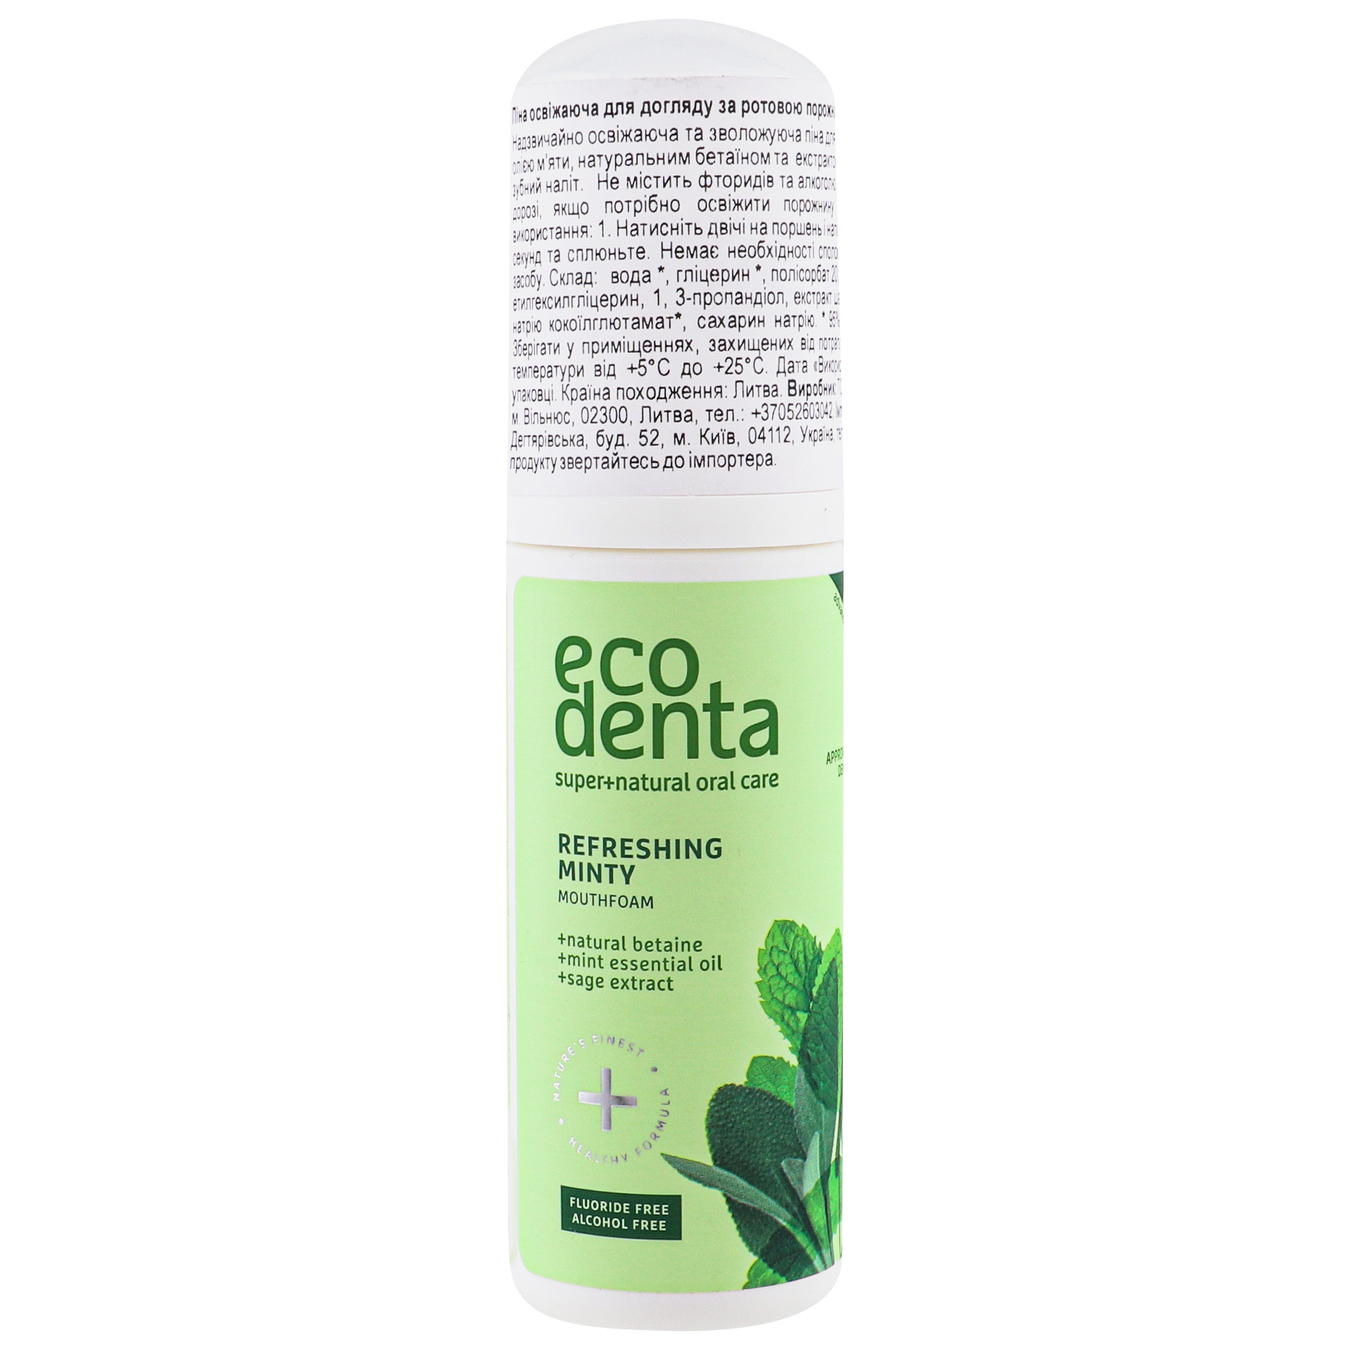 Foam Ecodenta for oral care refreshing 50ml